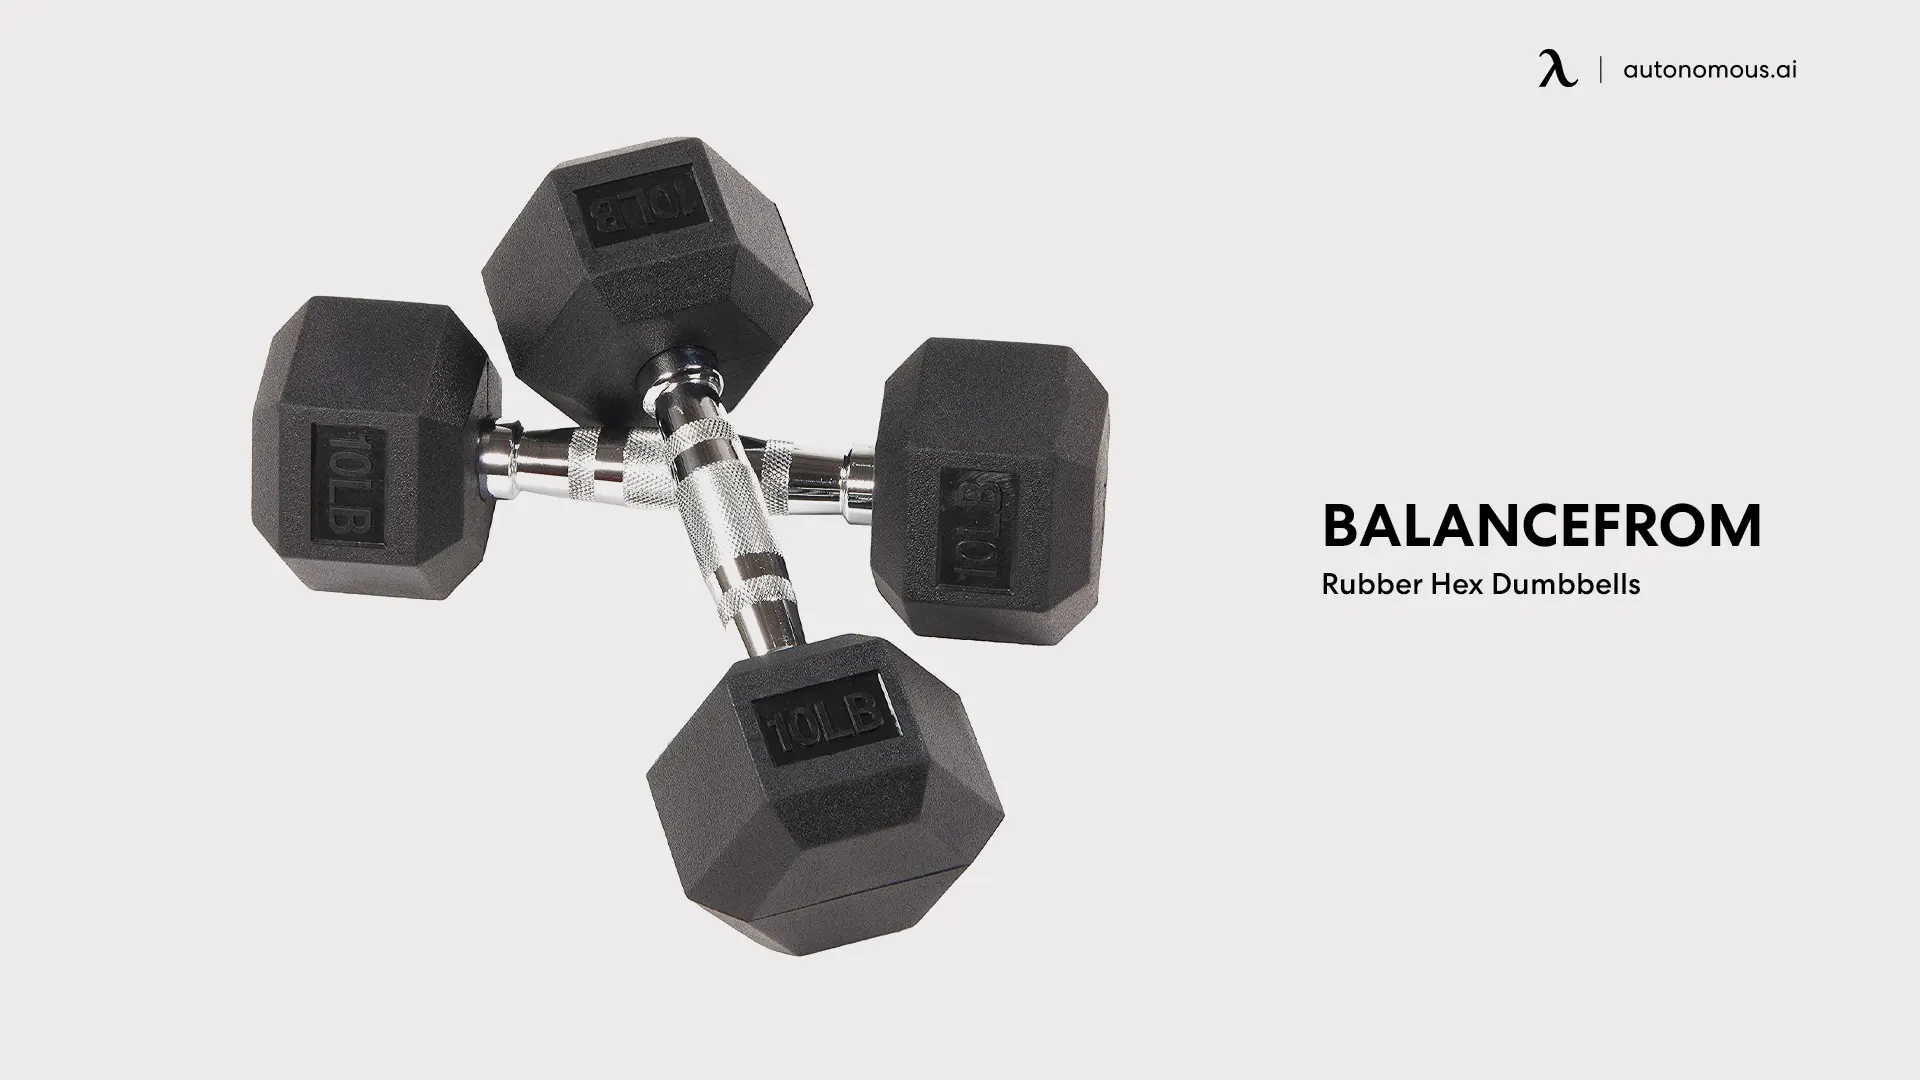 Balancefrom Rubber Hex Dumbbells